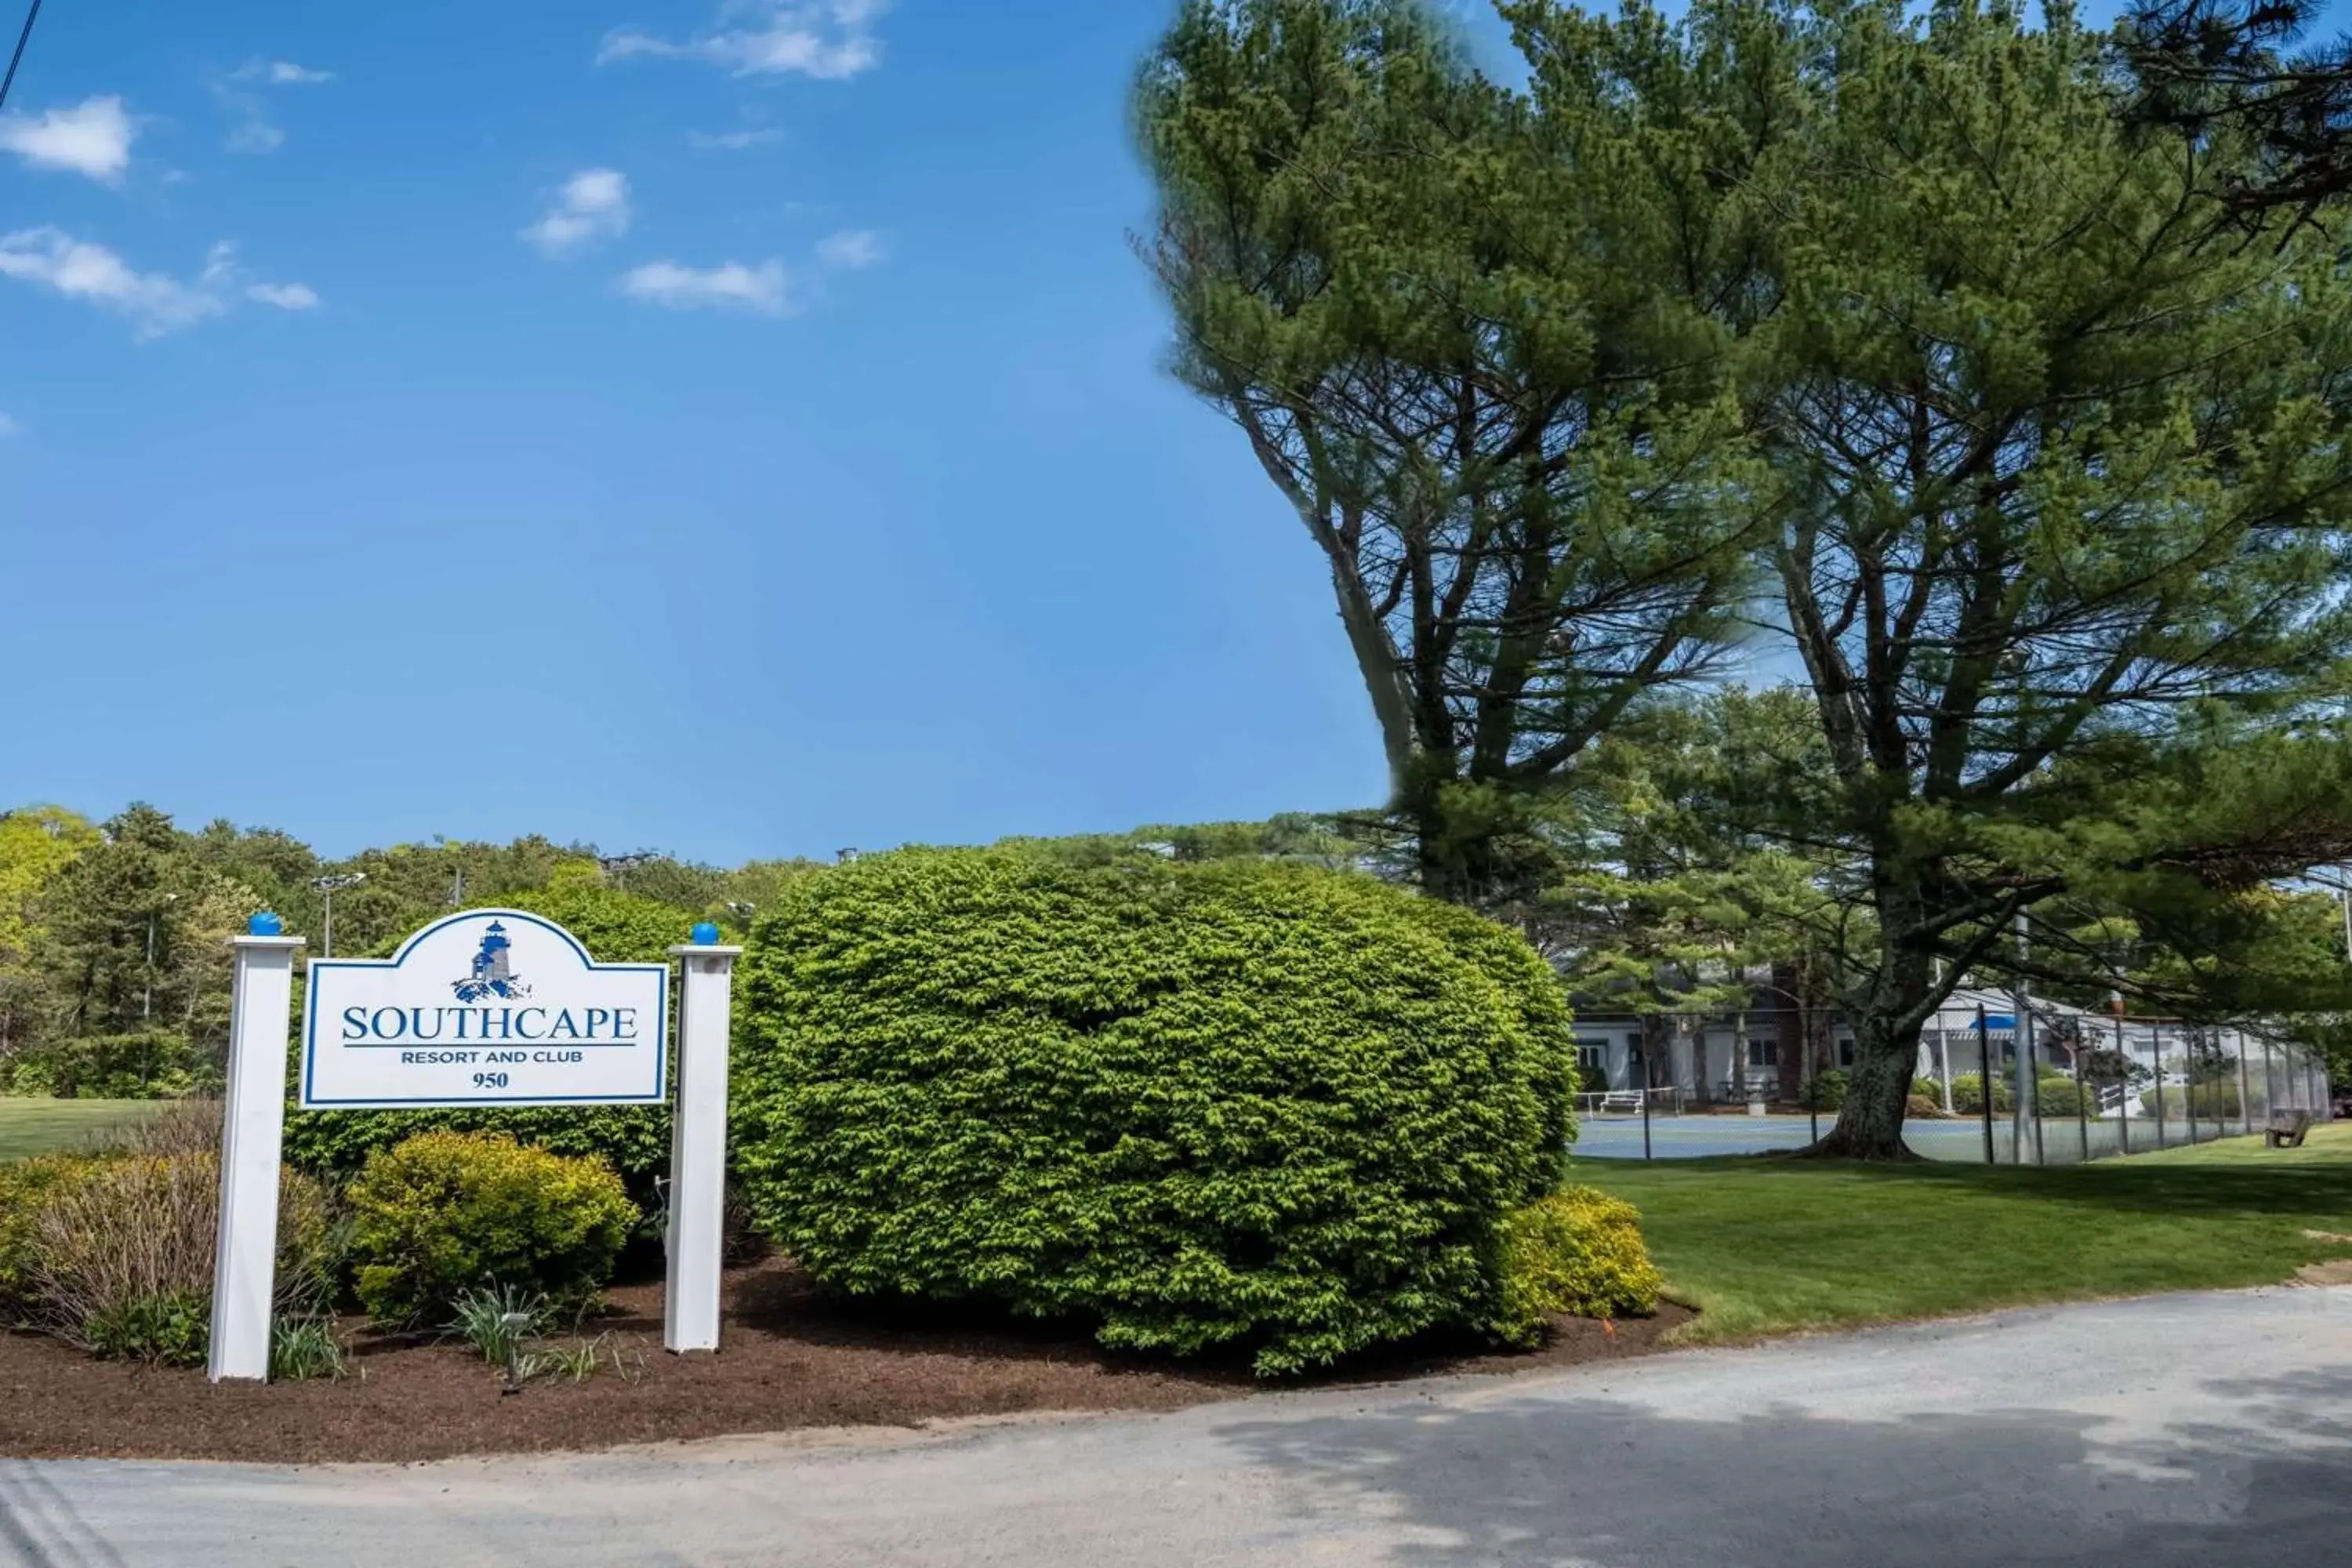 Property building, Property Logo/Sign in Southcape Resort Mashpee a Ramada by Wyndham